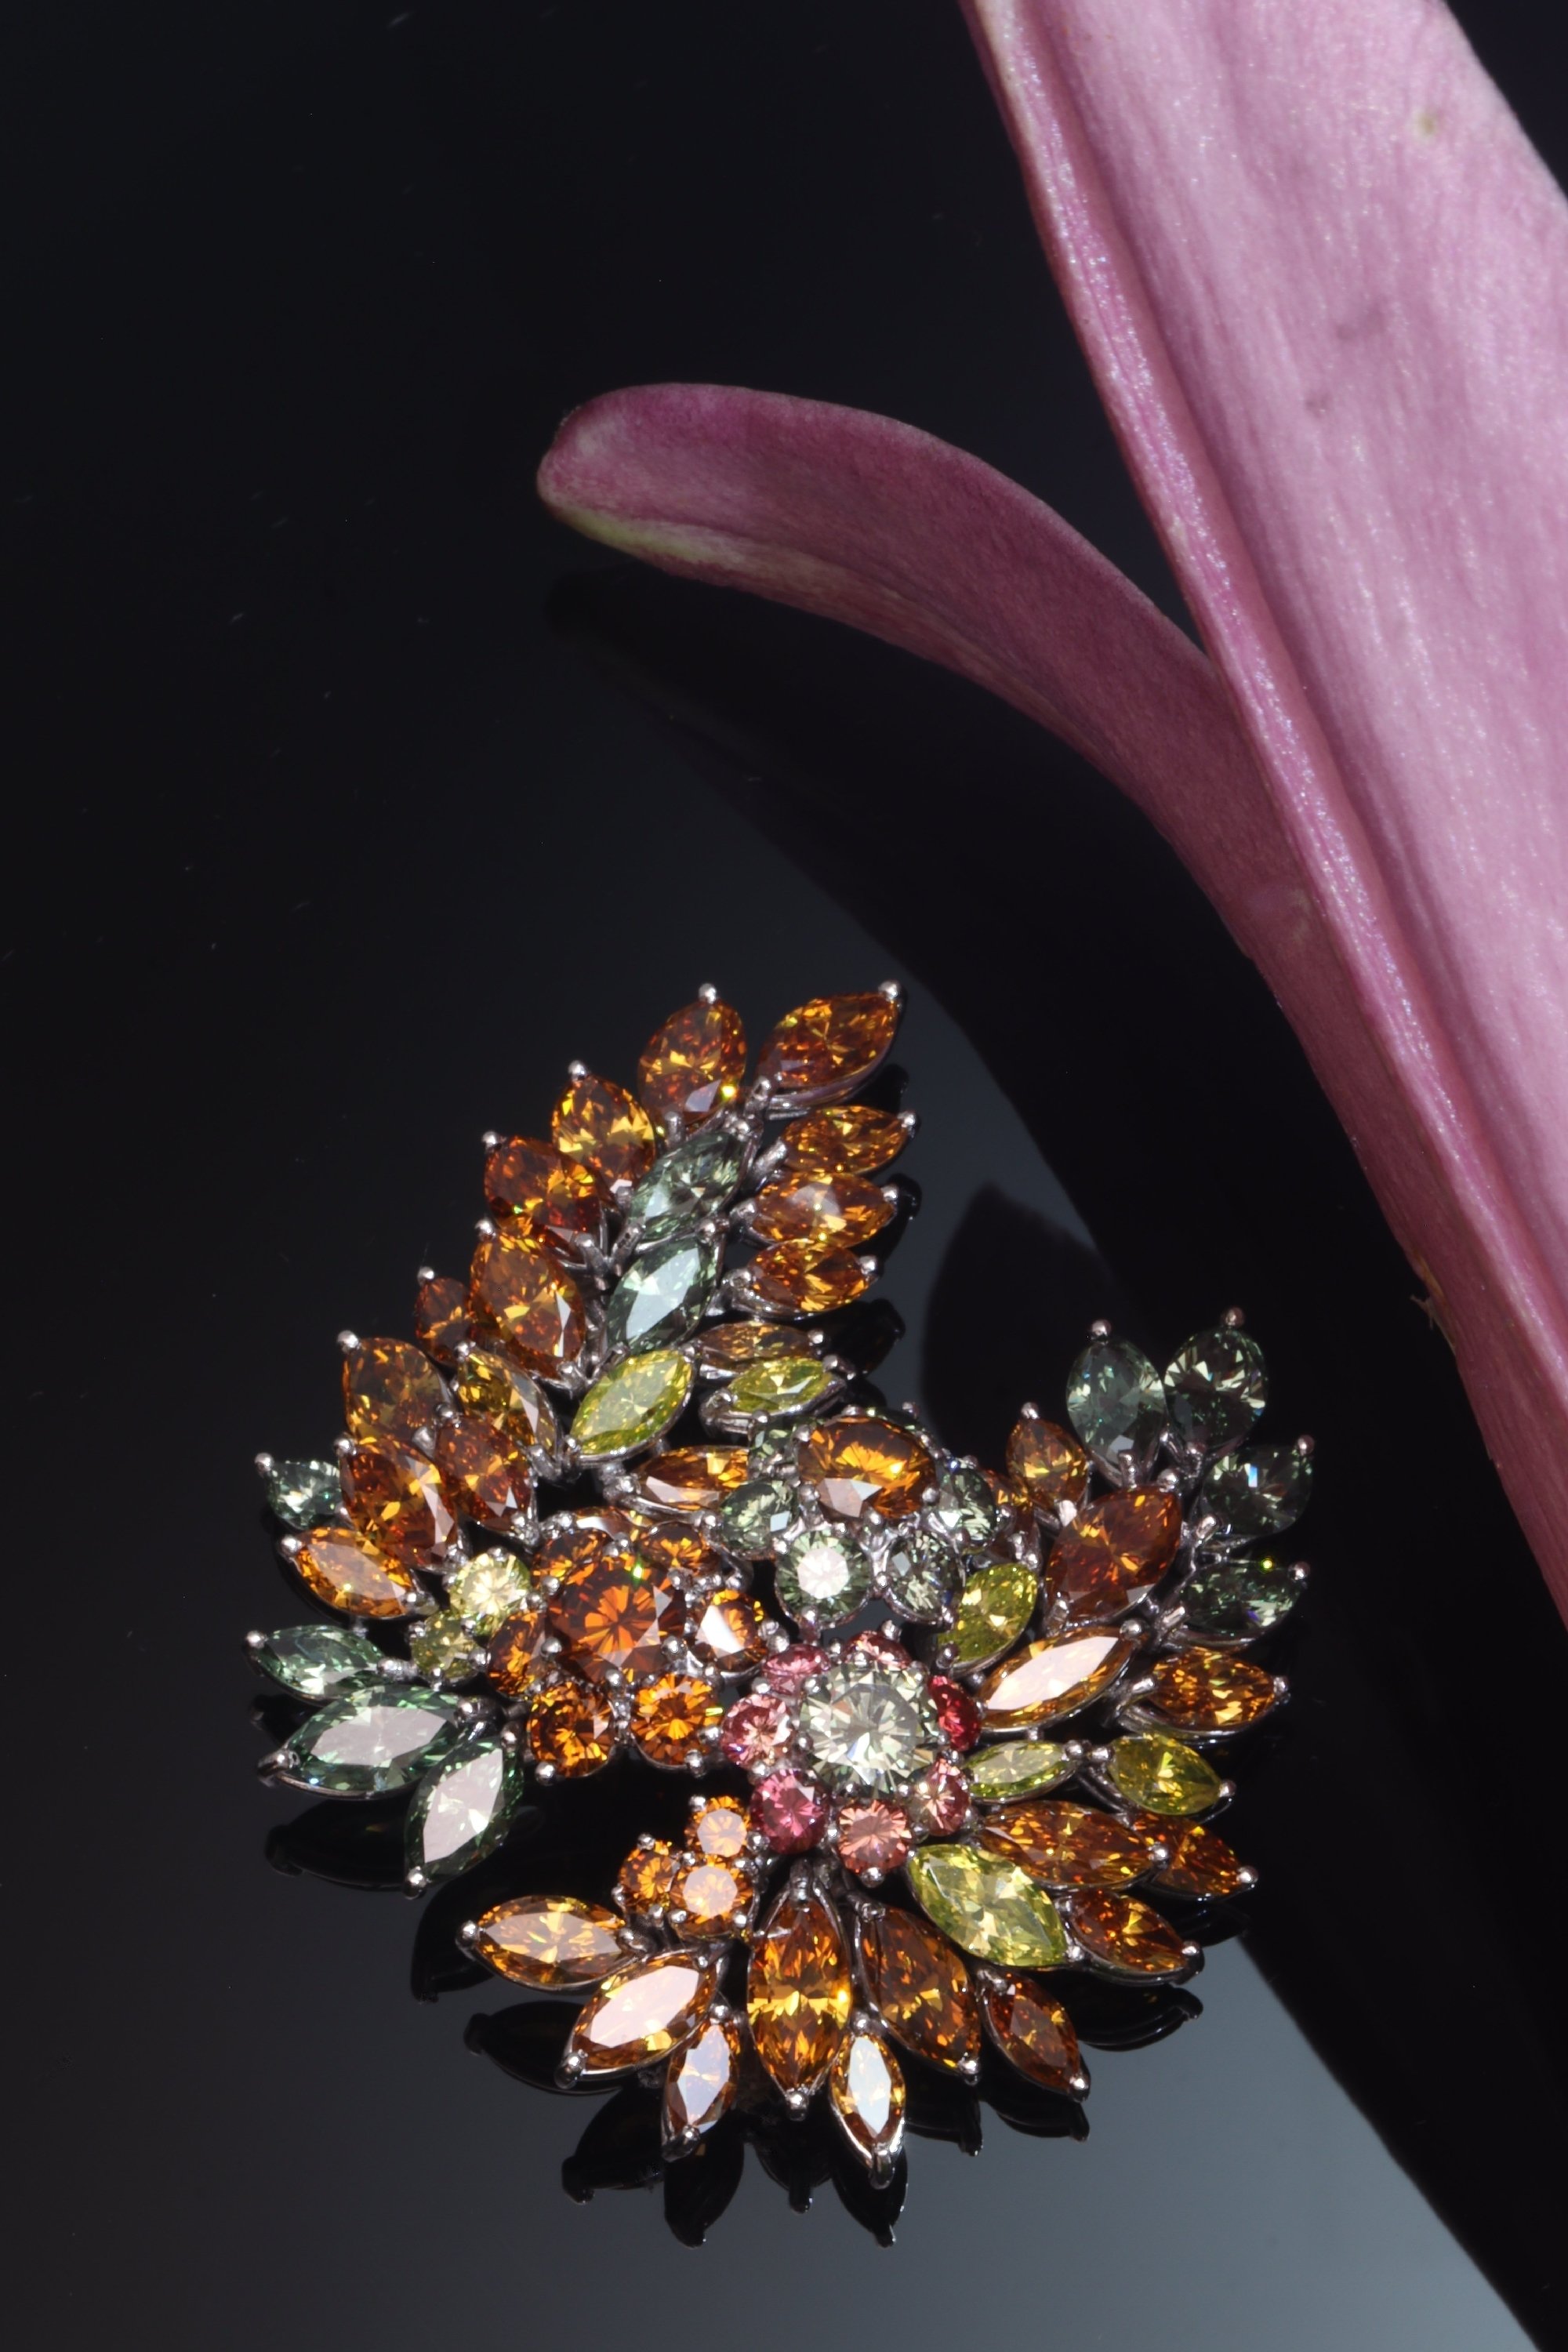 Glorious Garden: Buccellati's High Jewellery Blooms with Colour